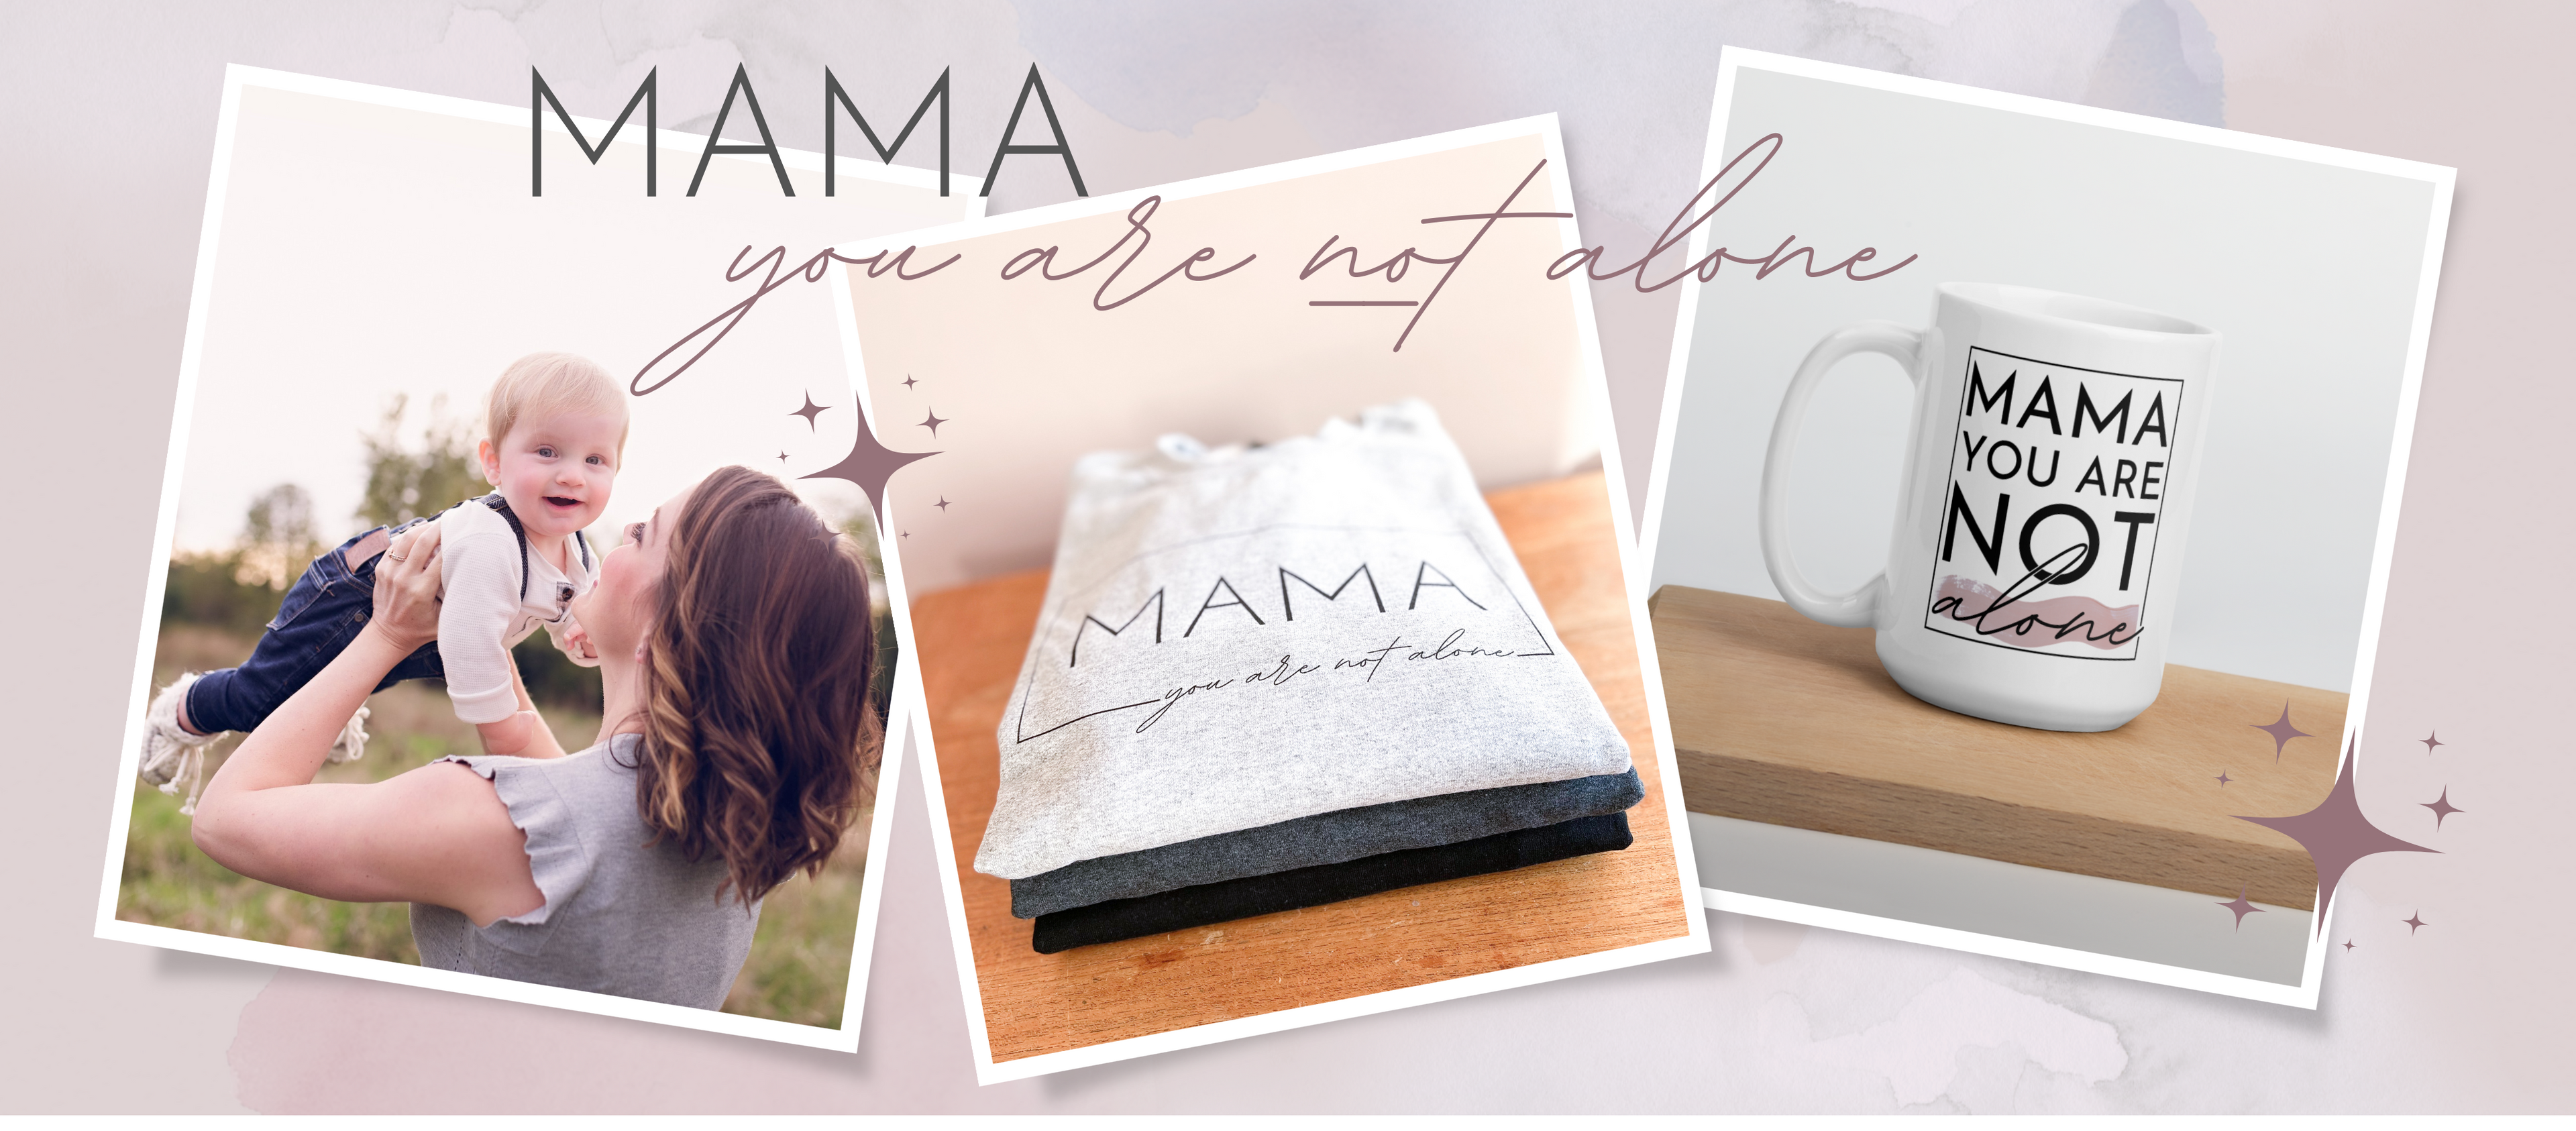 MAMAyana - products designed for honest motherhood. Mama, you are not alone